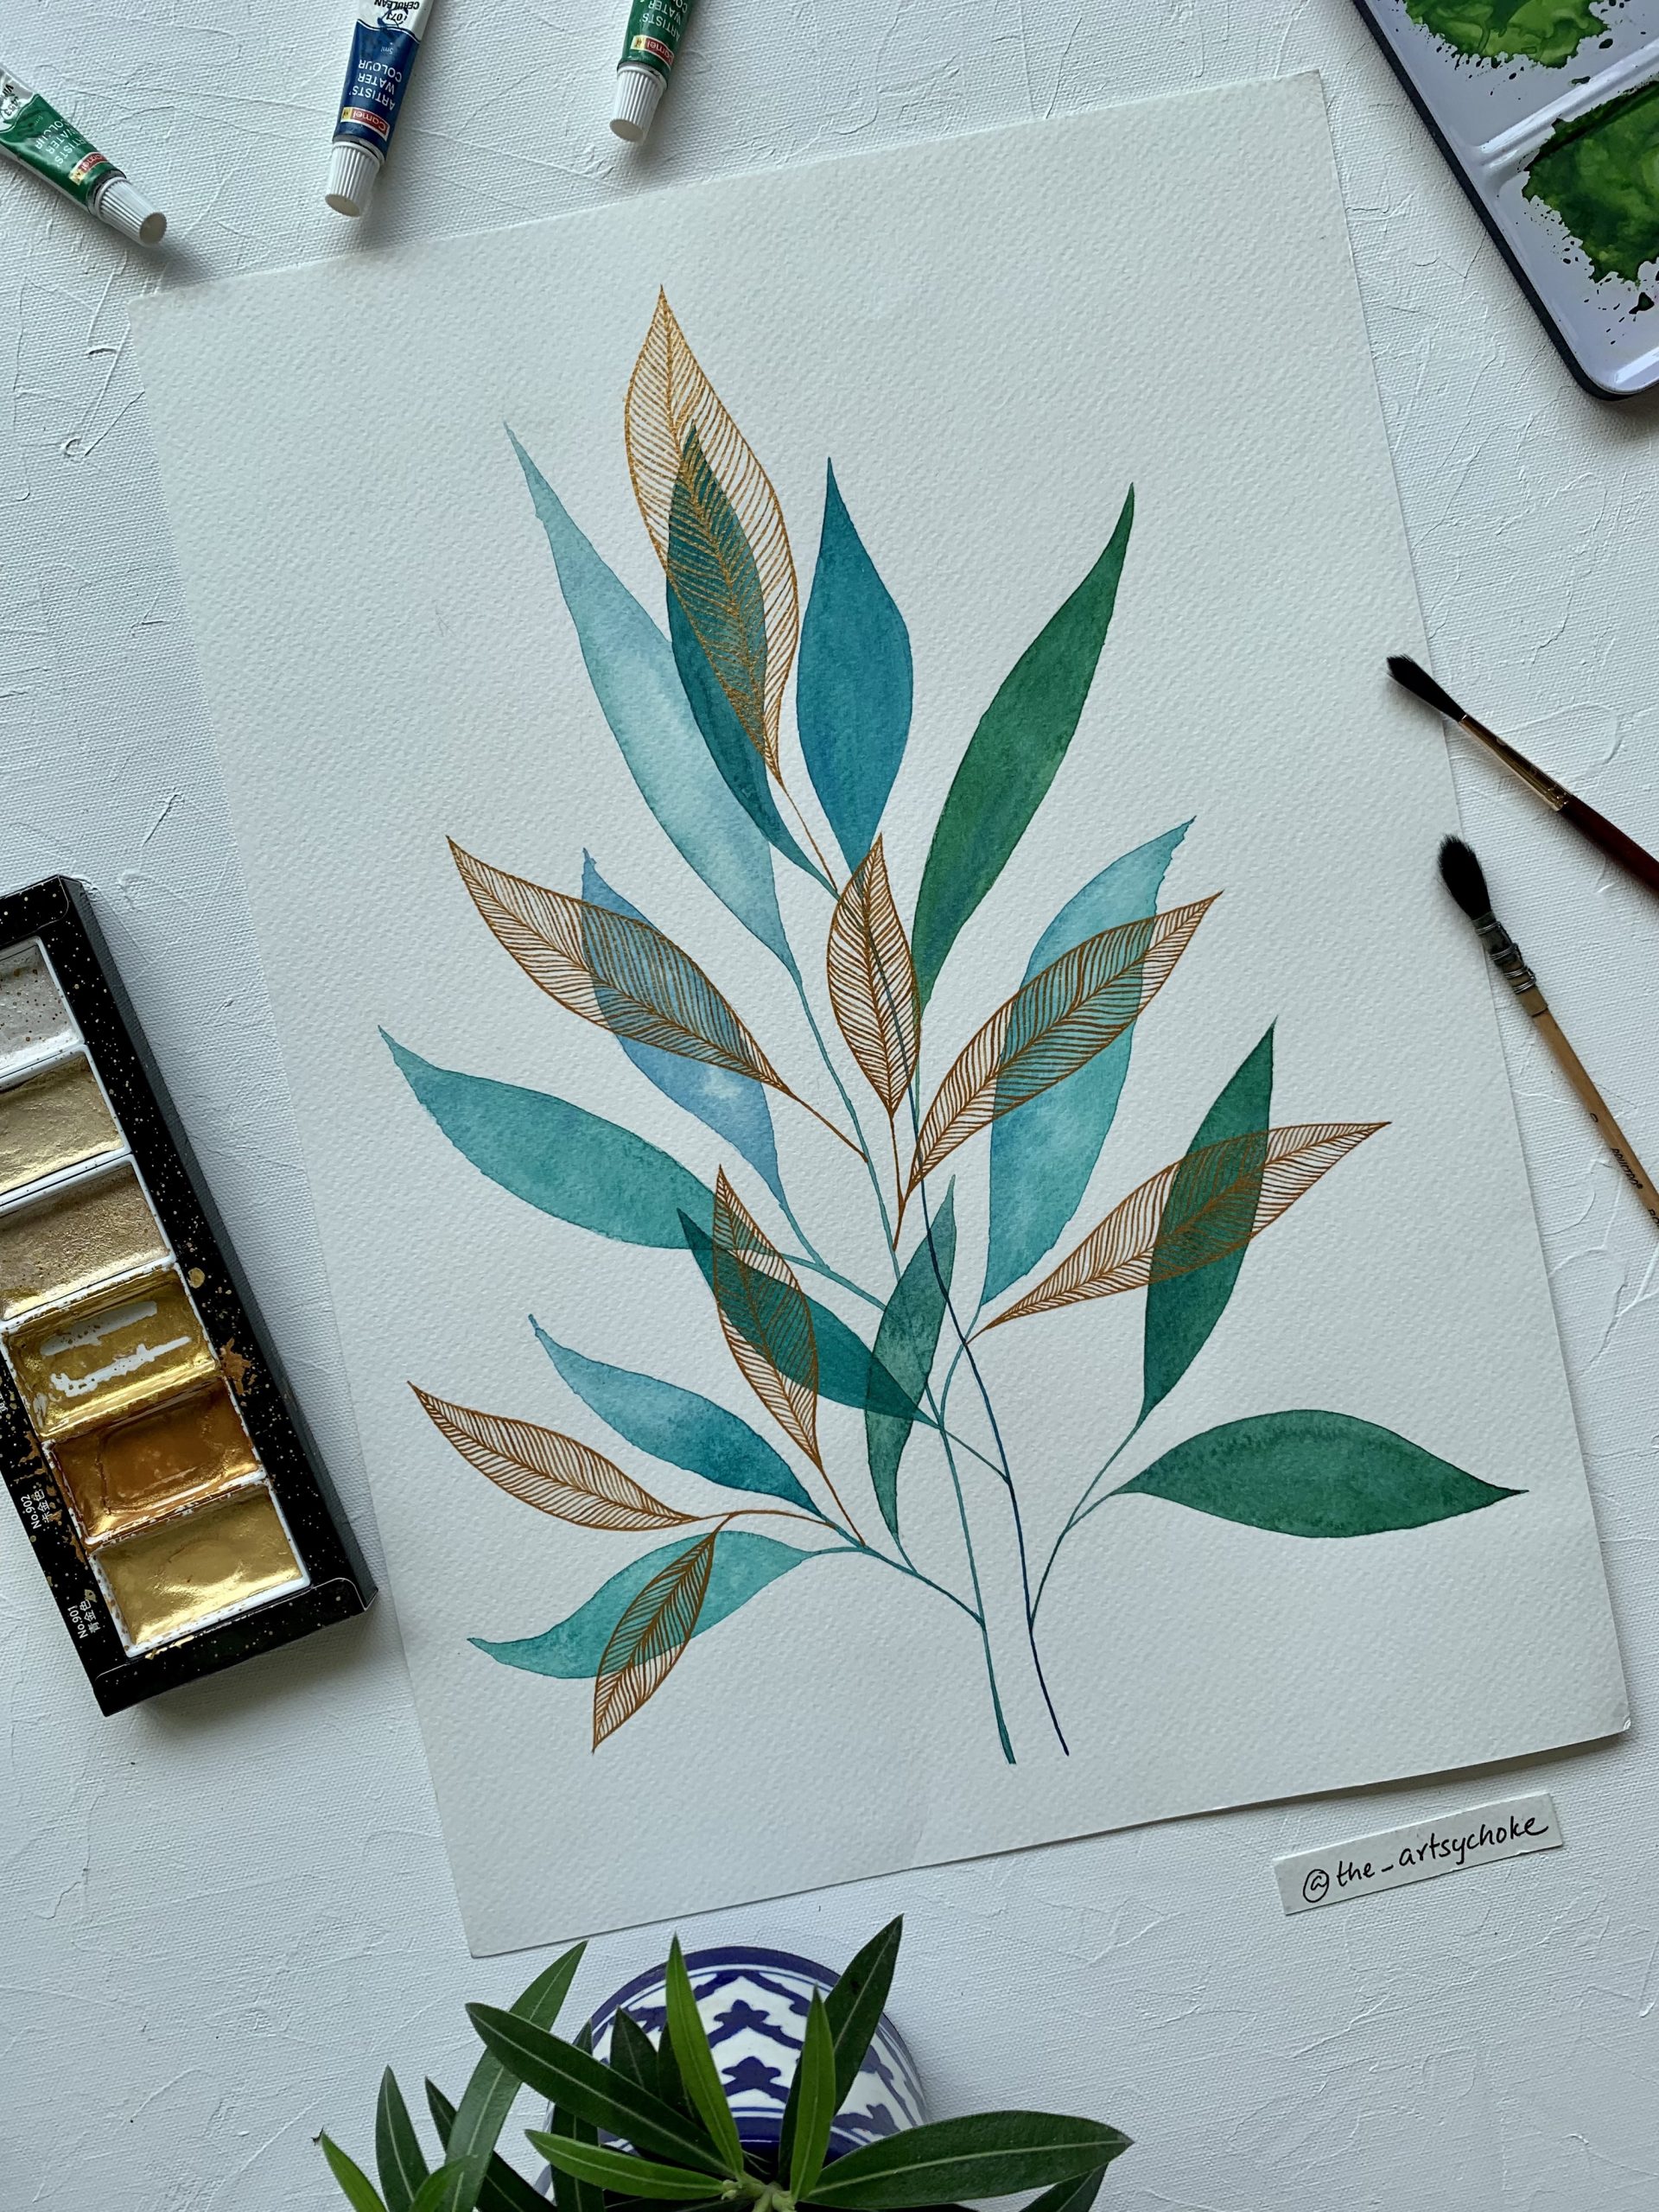 gilded-leaves-watercolour-watercolor-art-painting-leaves-contemporary-simple-minimal-poster-wallart-artwork-green-gold-botanical